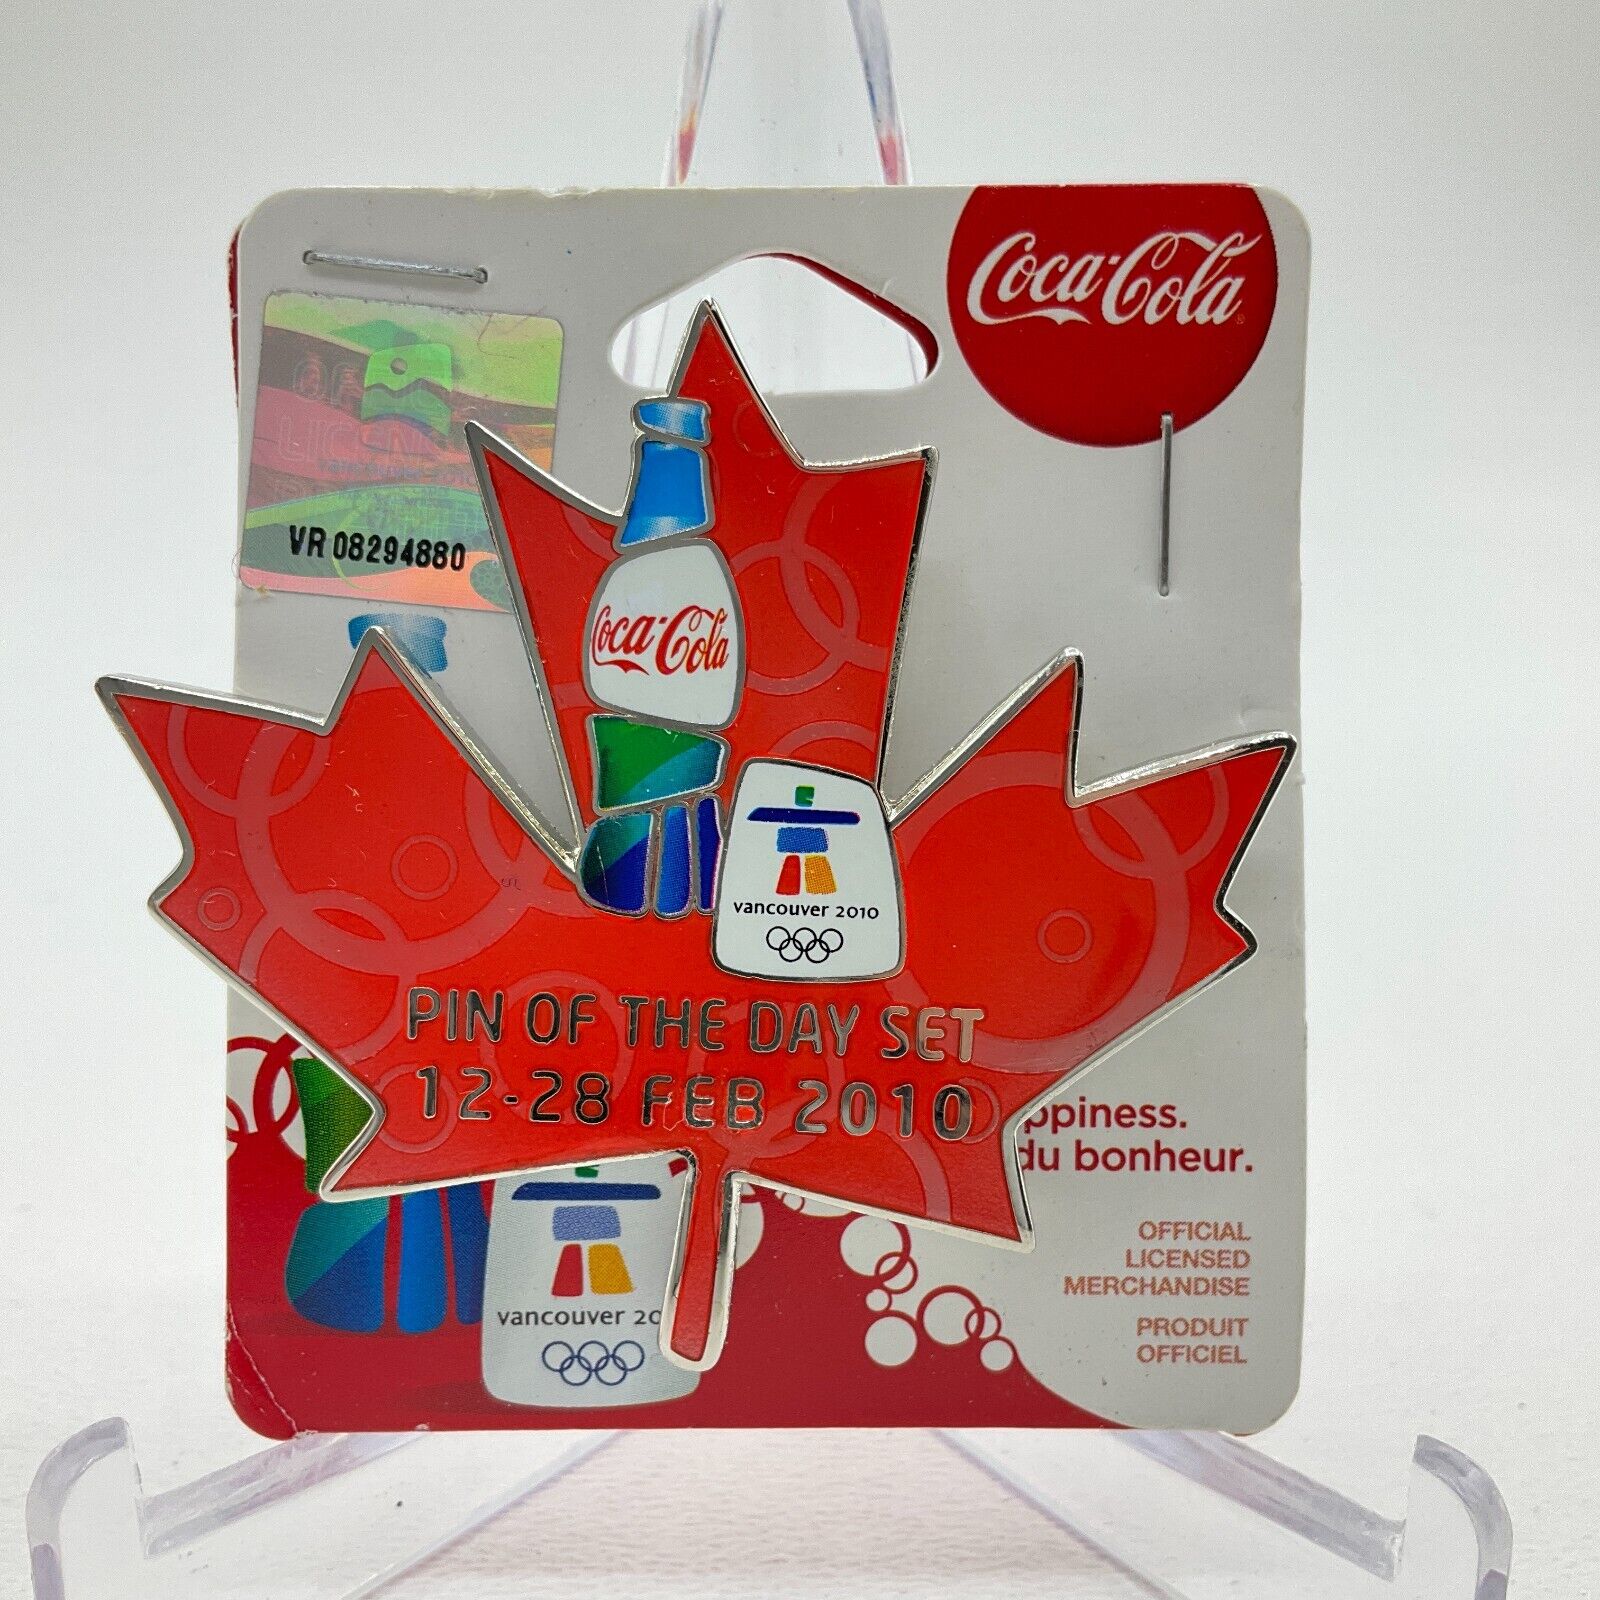 Coca Cola 2010 Vancouver Winter Olympics Pin Maple Leaf Pin of the Day Set